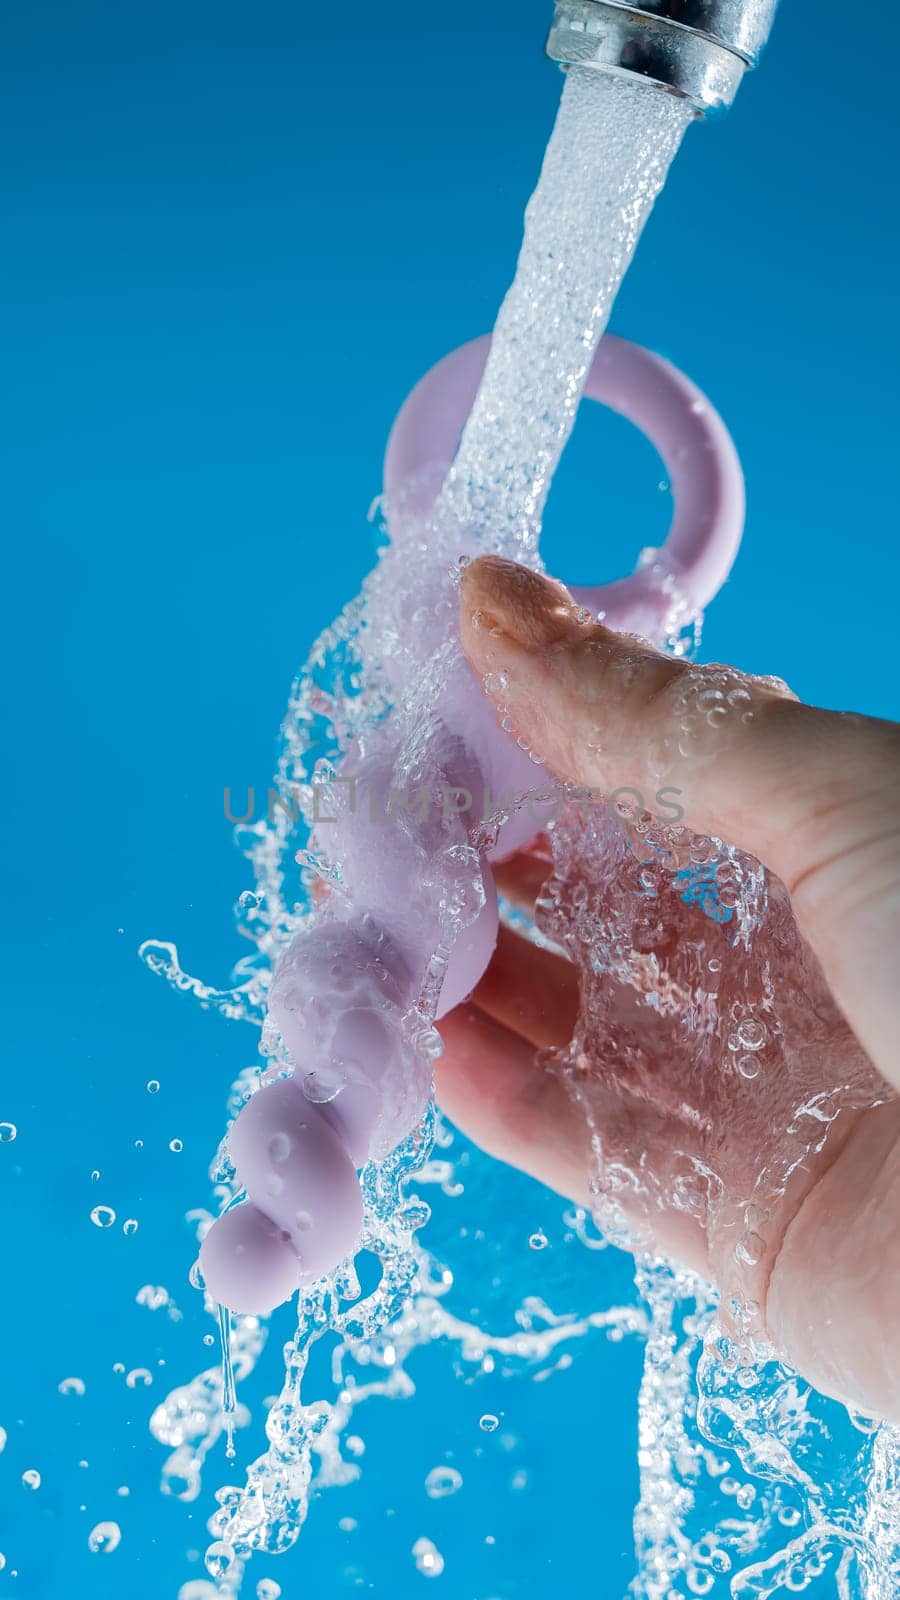 Woman holding lilac anal beads under running water on blue background. Sex toy hygiene concept. by mrwed54